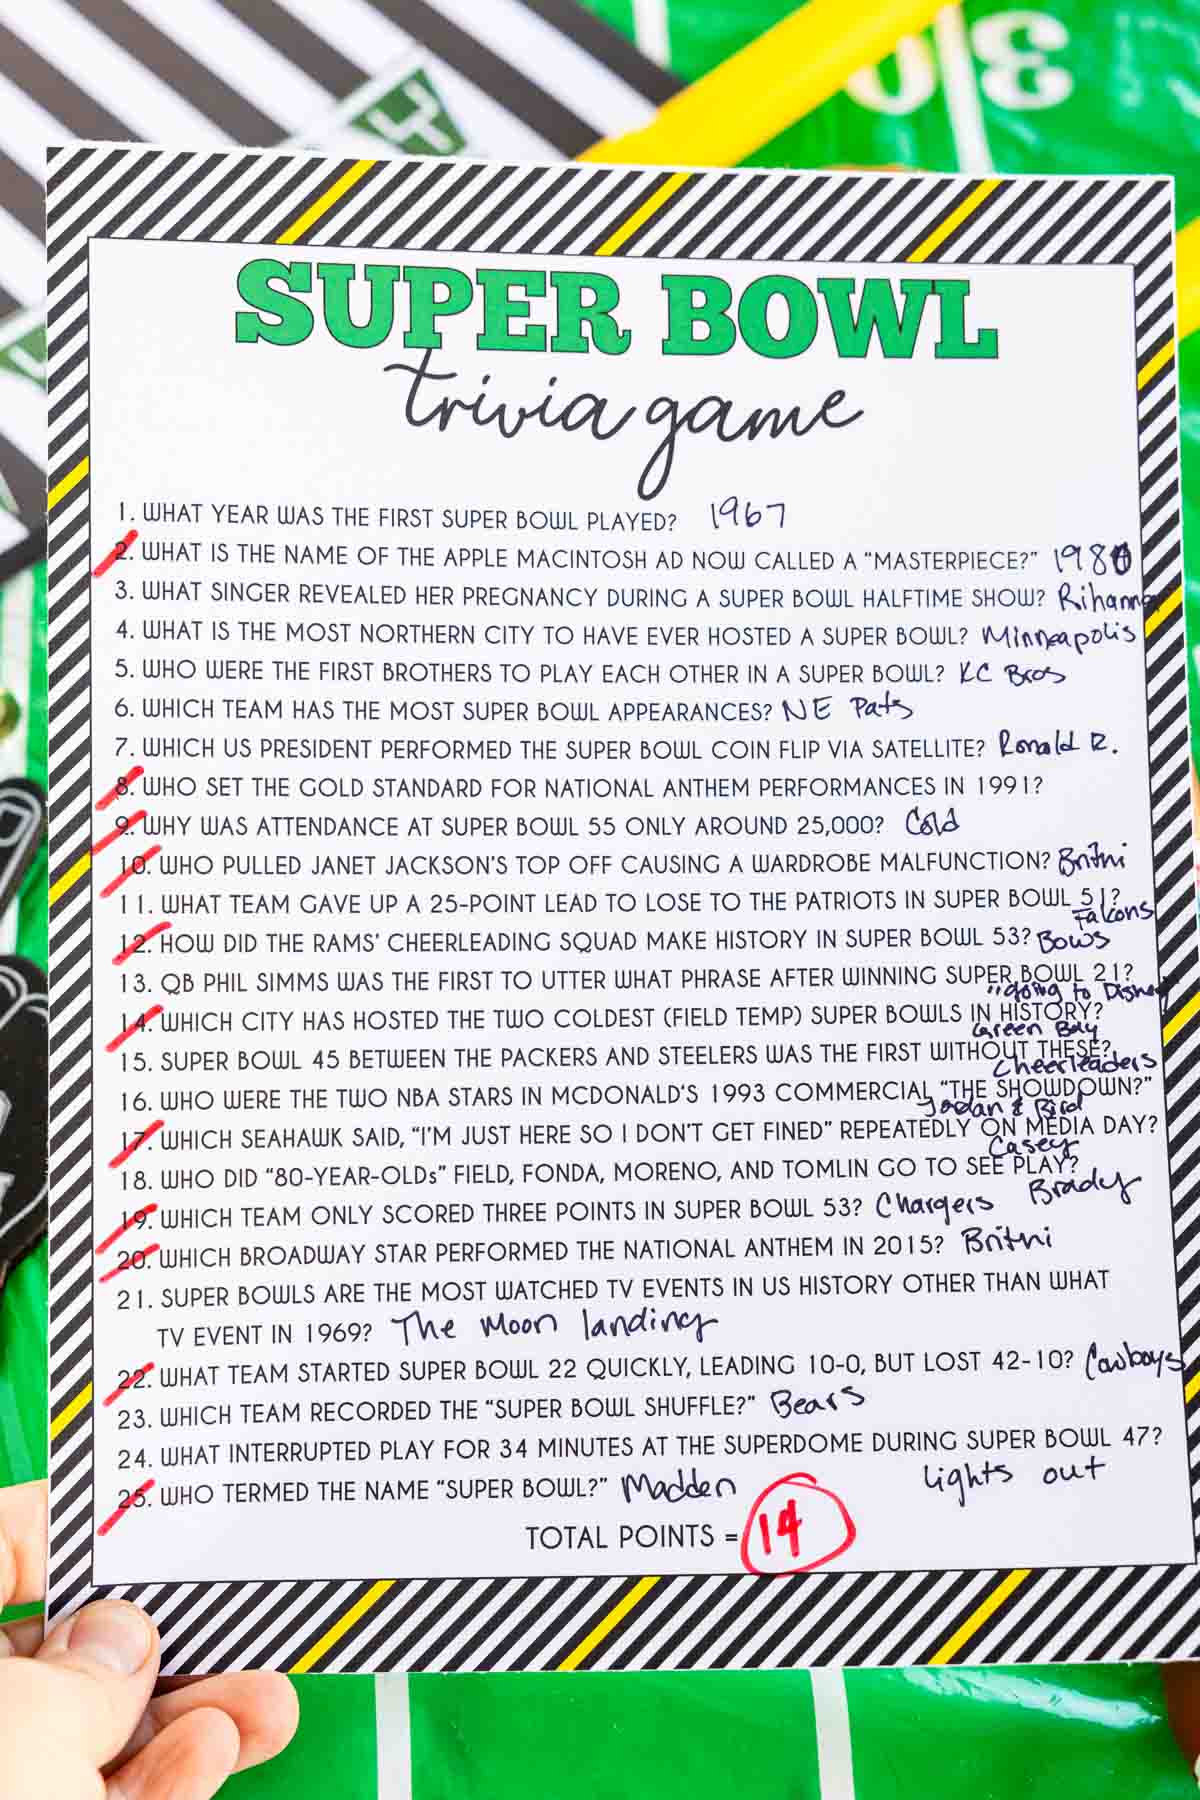 Super Bowl trivia game with answers written in